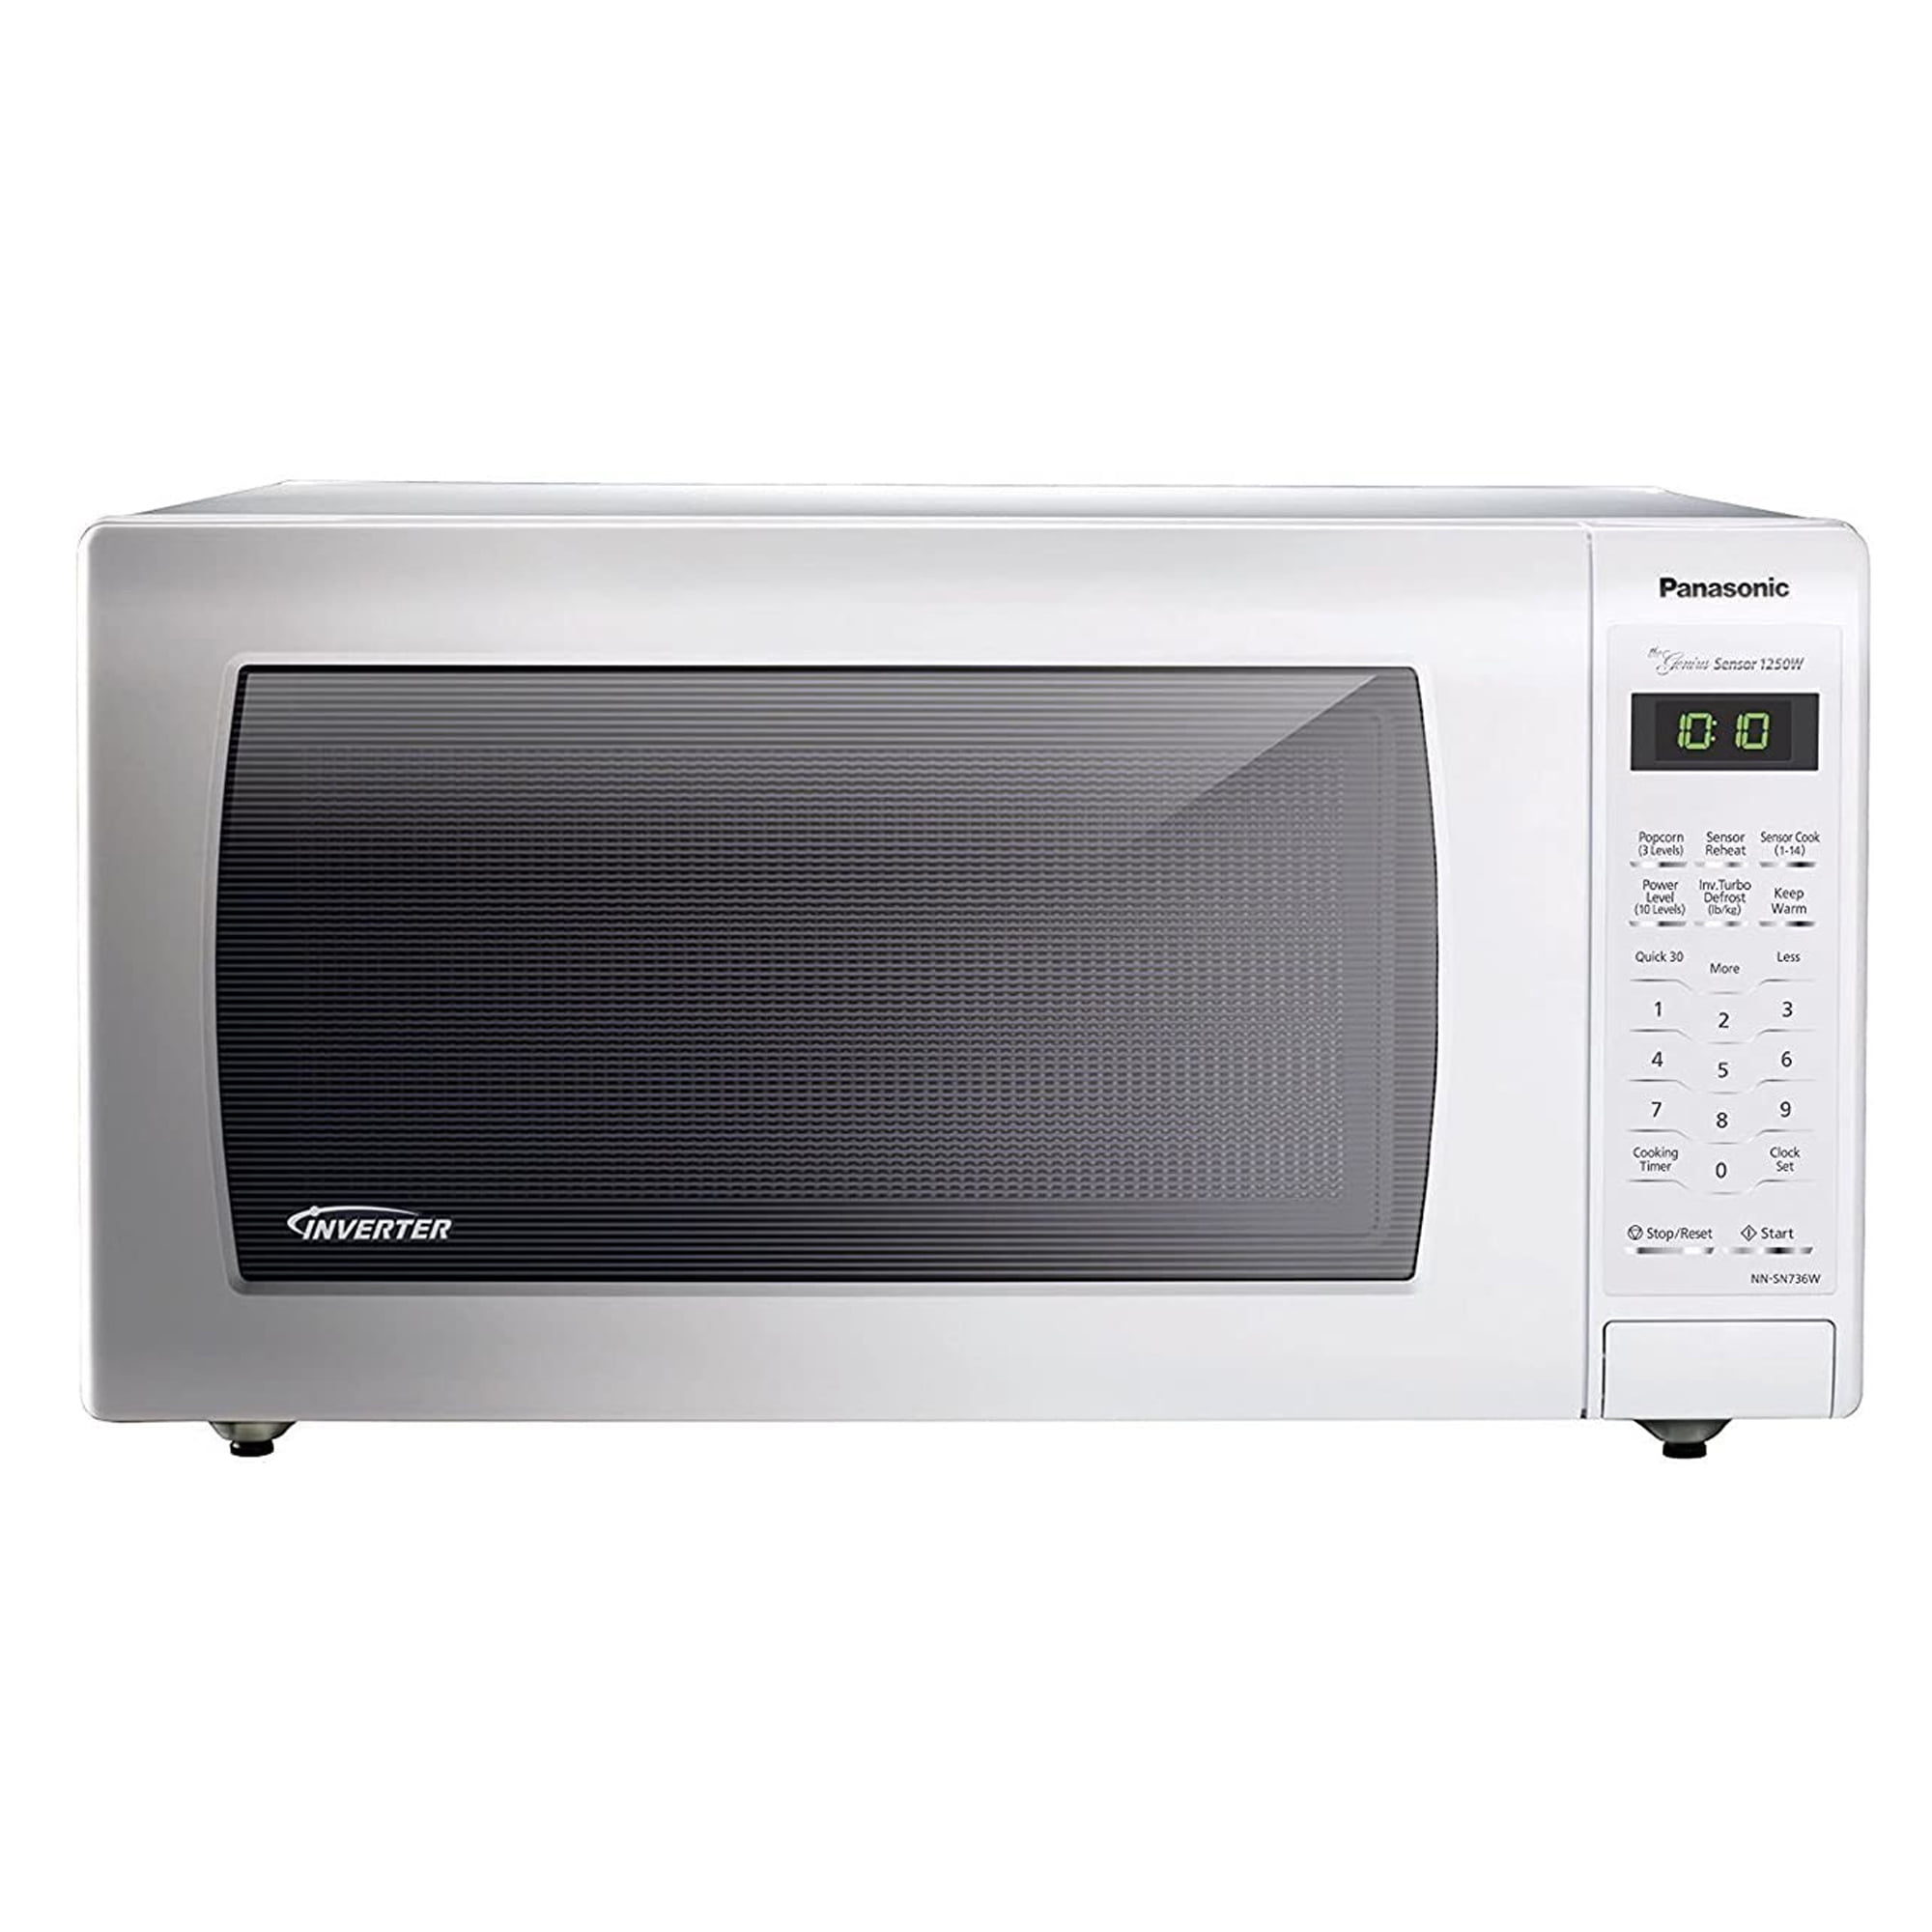 Farberware Professional 1.1 cu. Ft. 1000-Watt Countertop Microwave Oven in  Stainless Steel FMO11AHTBKL - The Home Depot